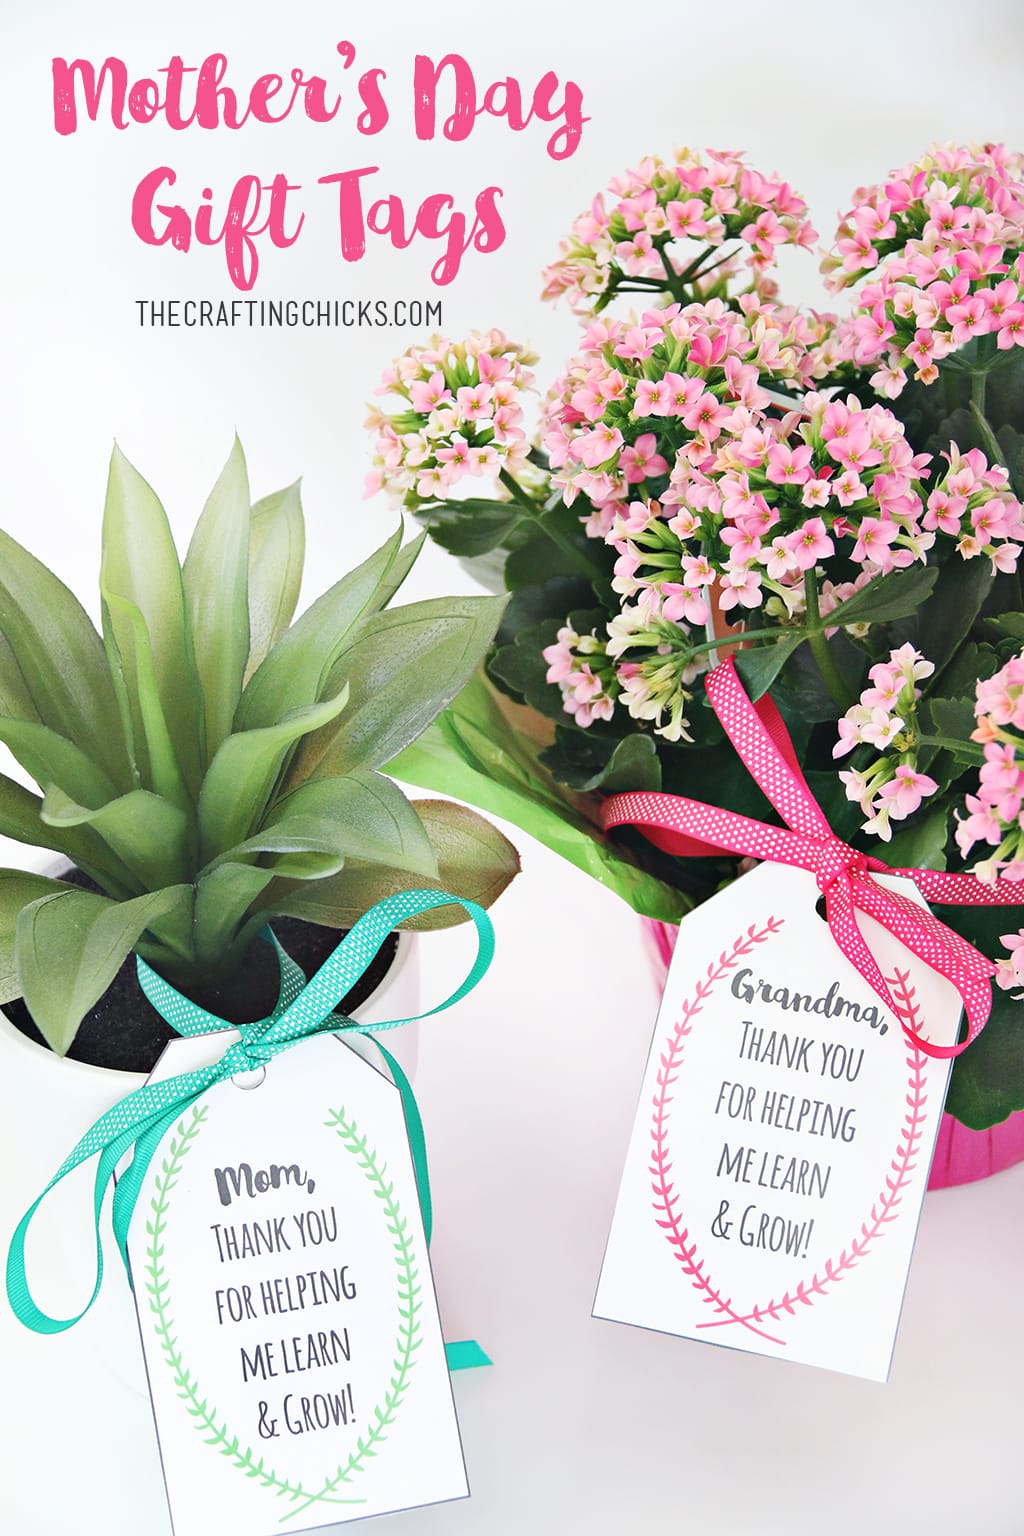 Mother's Day Plant Printable Gift Tags - Mother’s and Grandmother’s will love pretty flowers or plants with a gift tag that ties it all together.